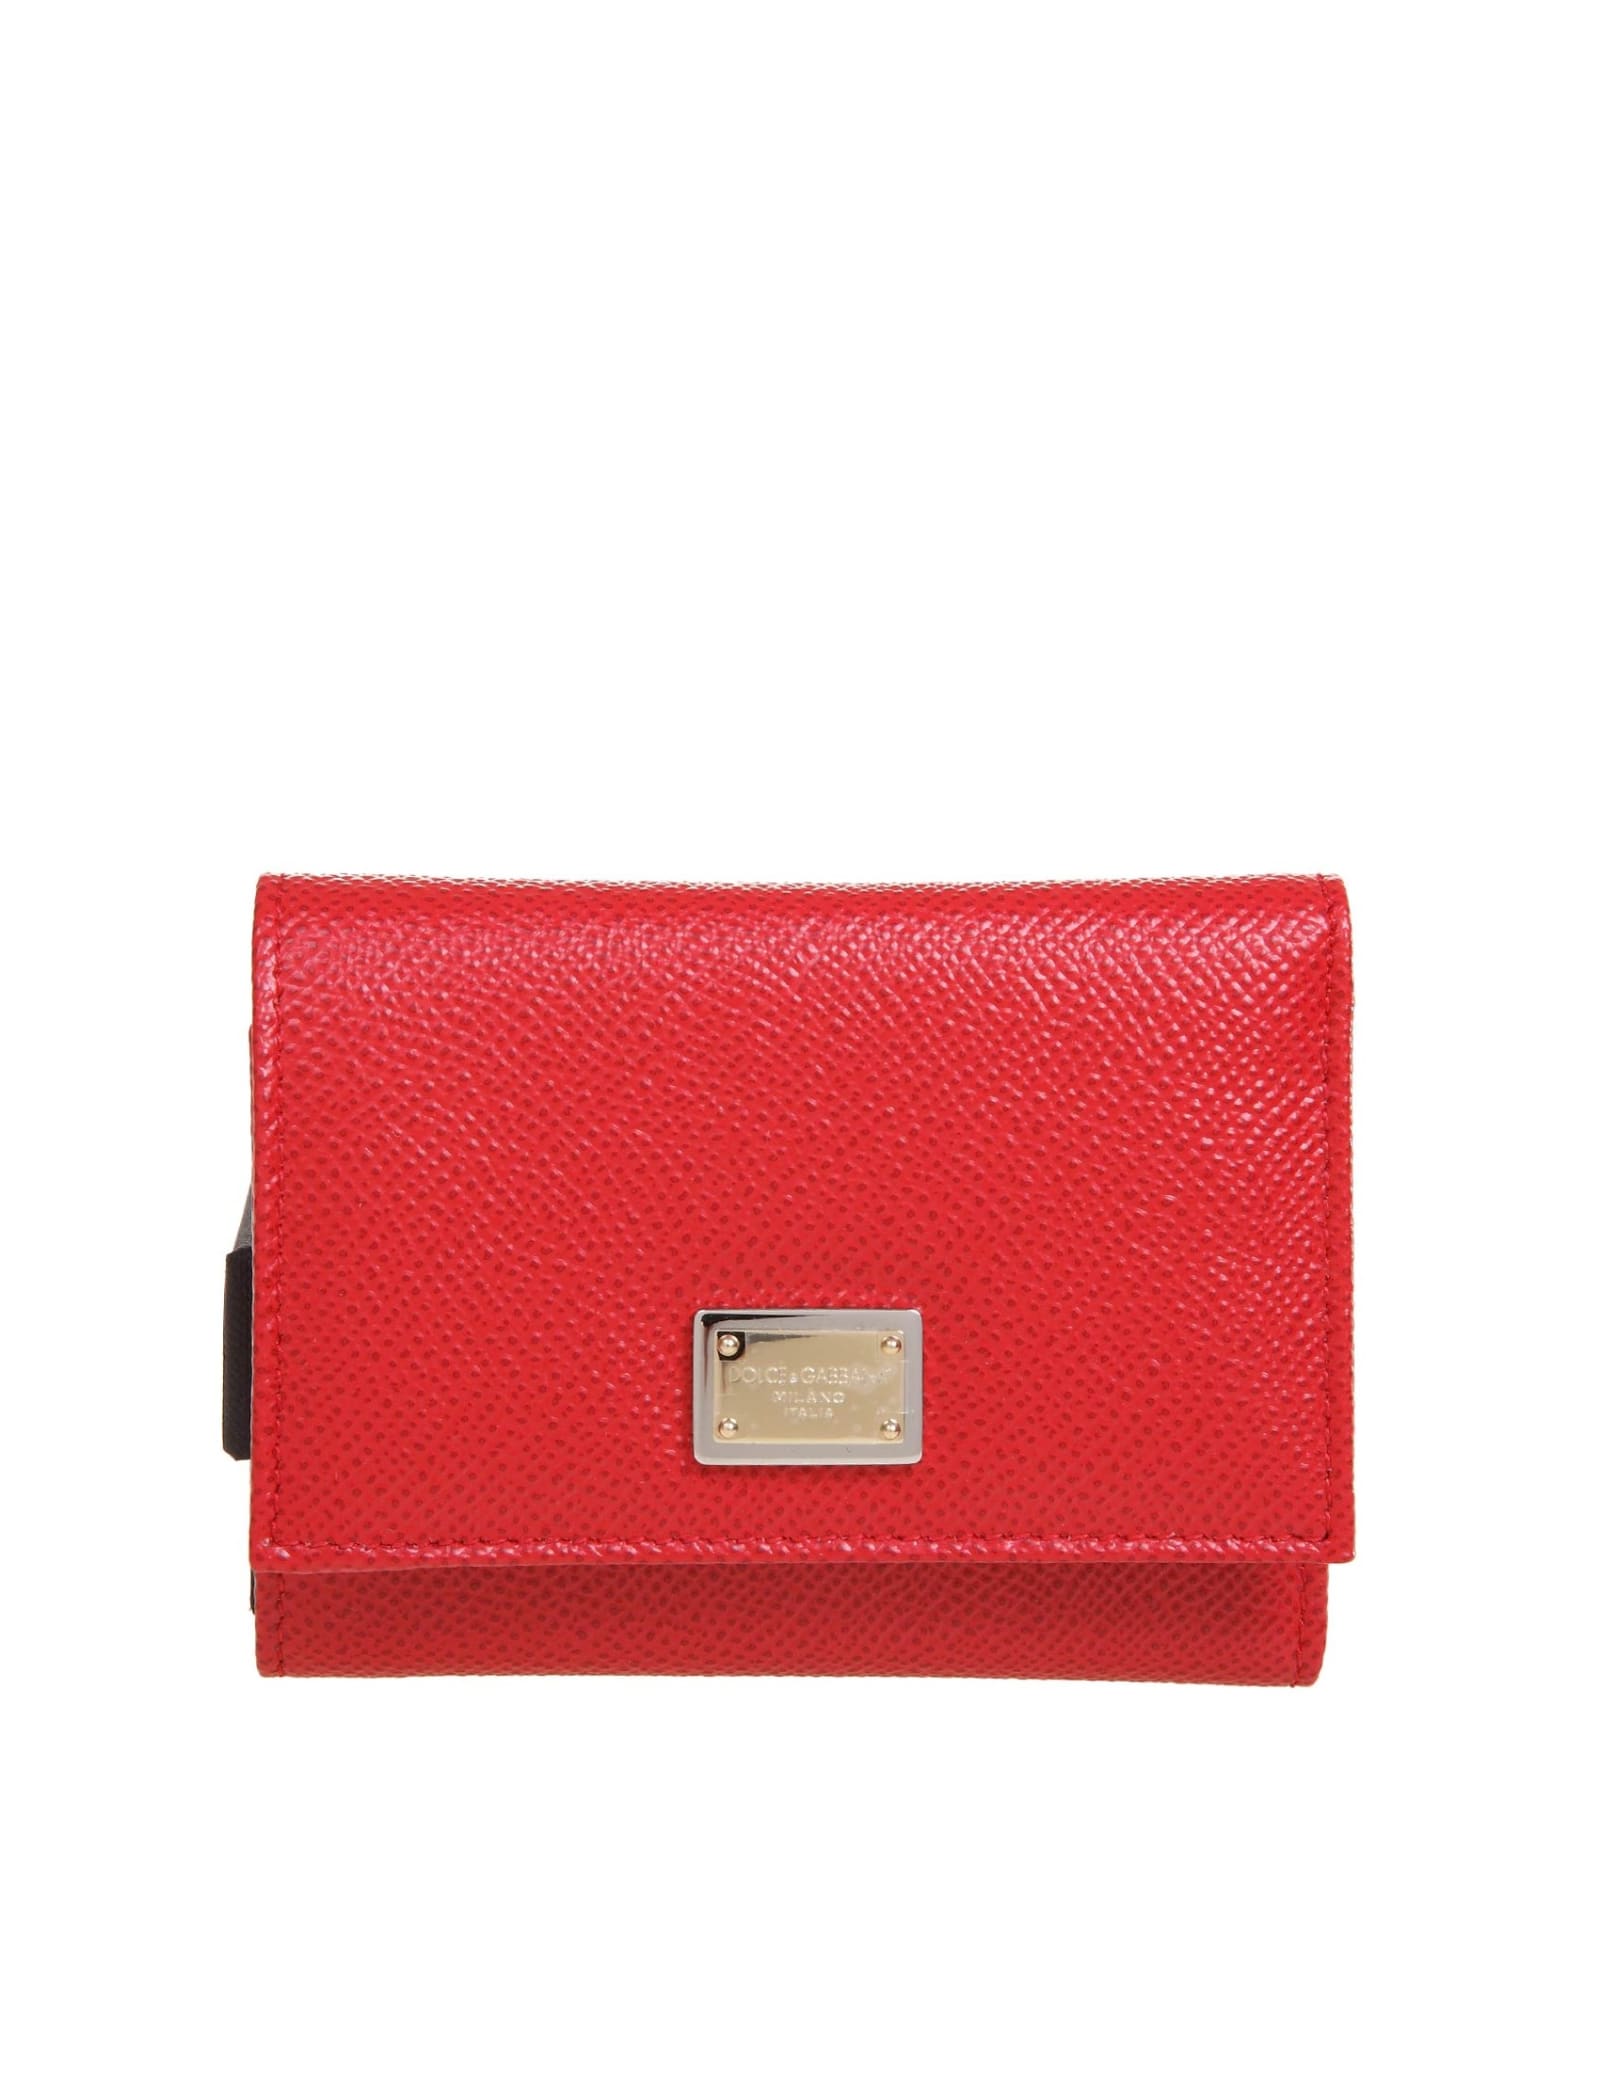 Dolce & Gabbana Leather Wallet With Dg Logo